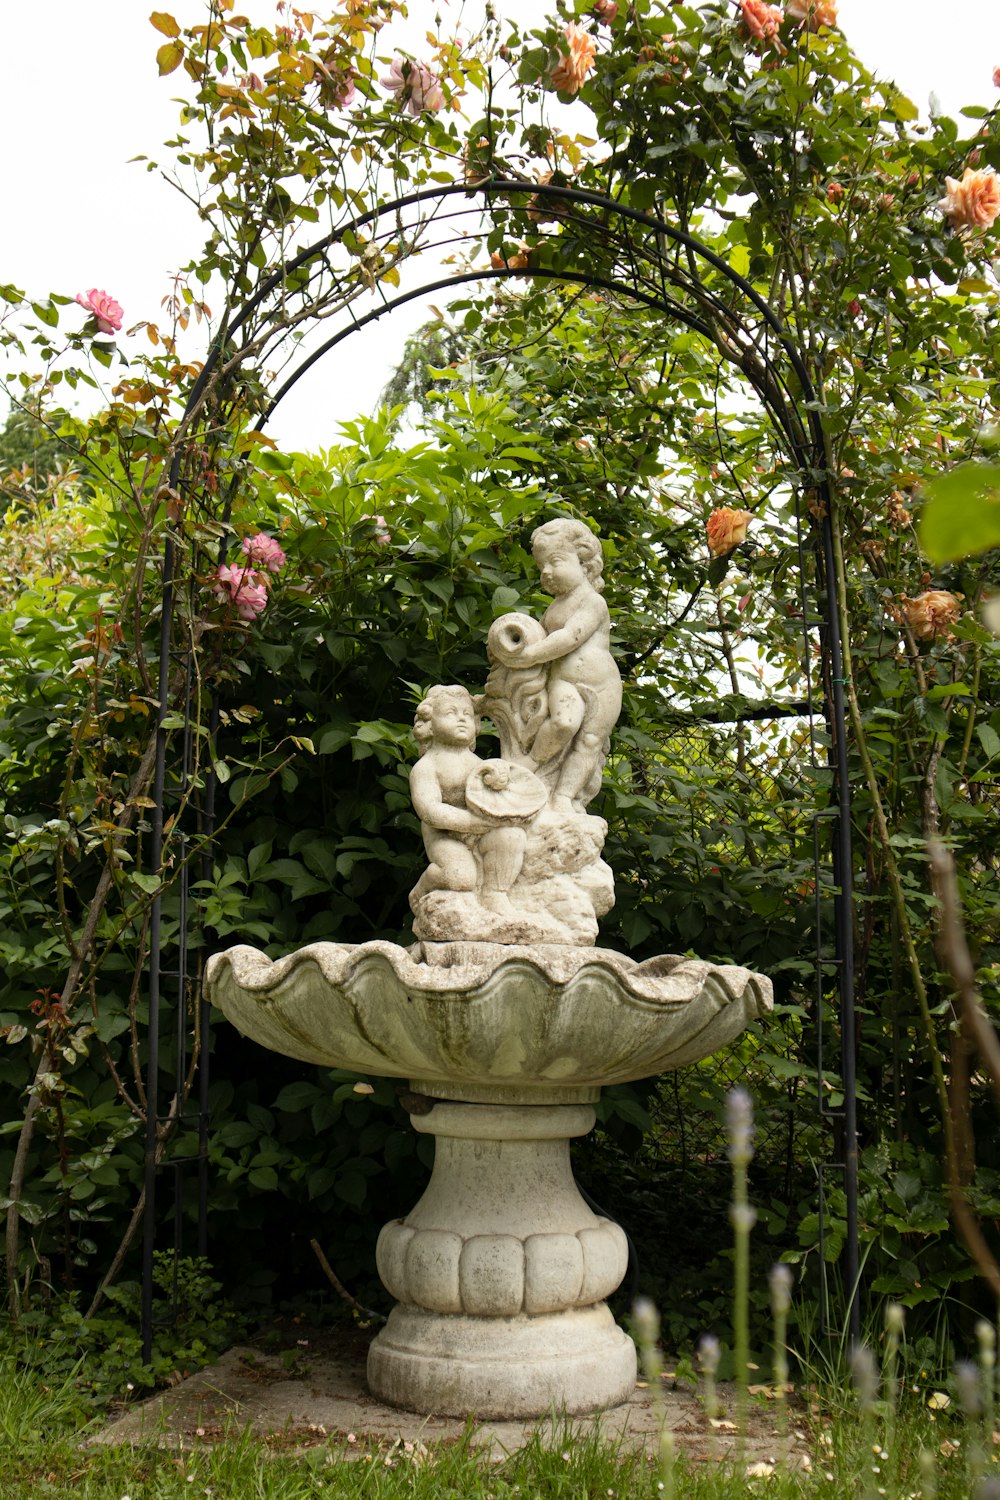 a stone fountain in a garden surrounded by flowers